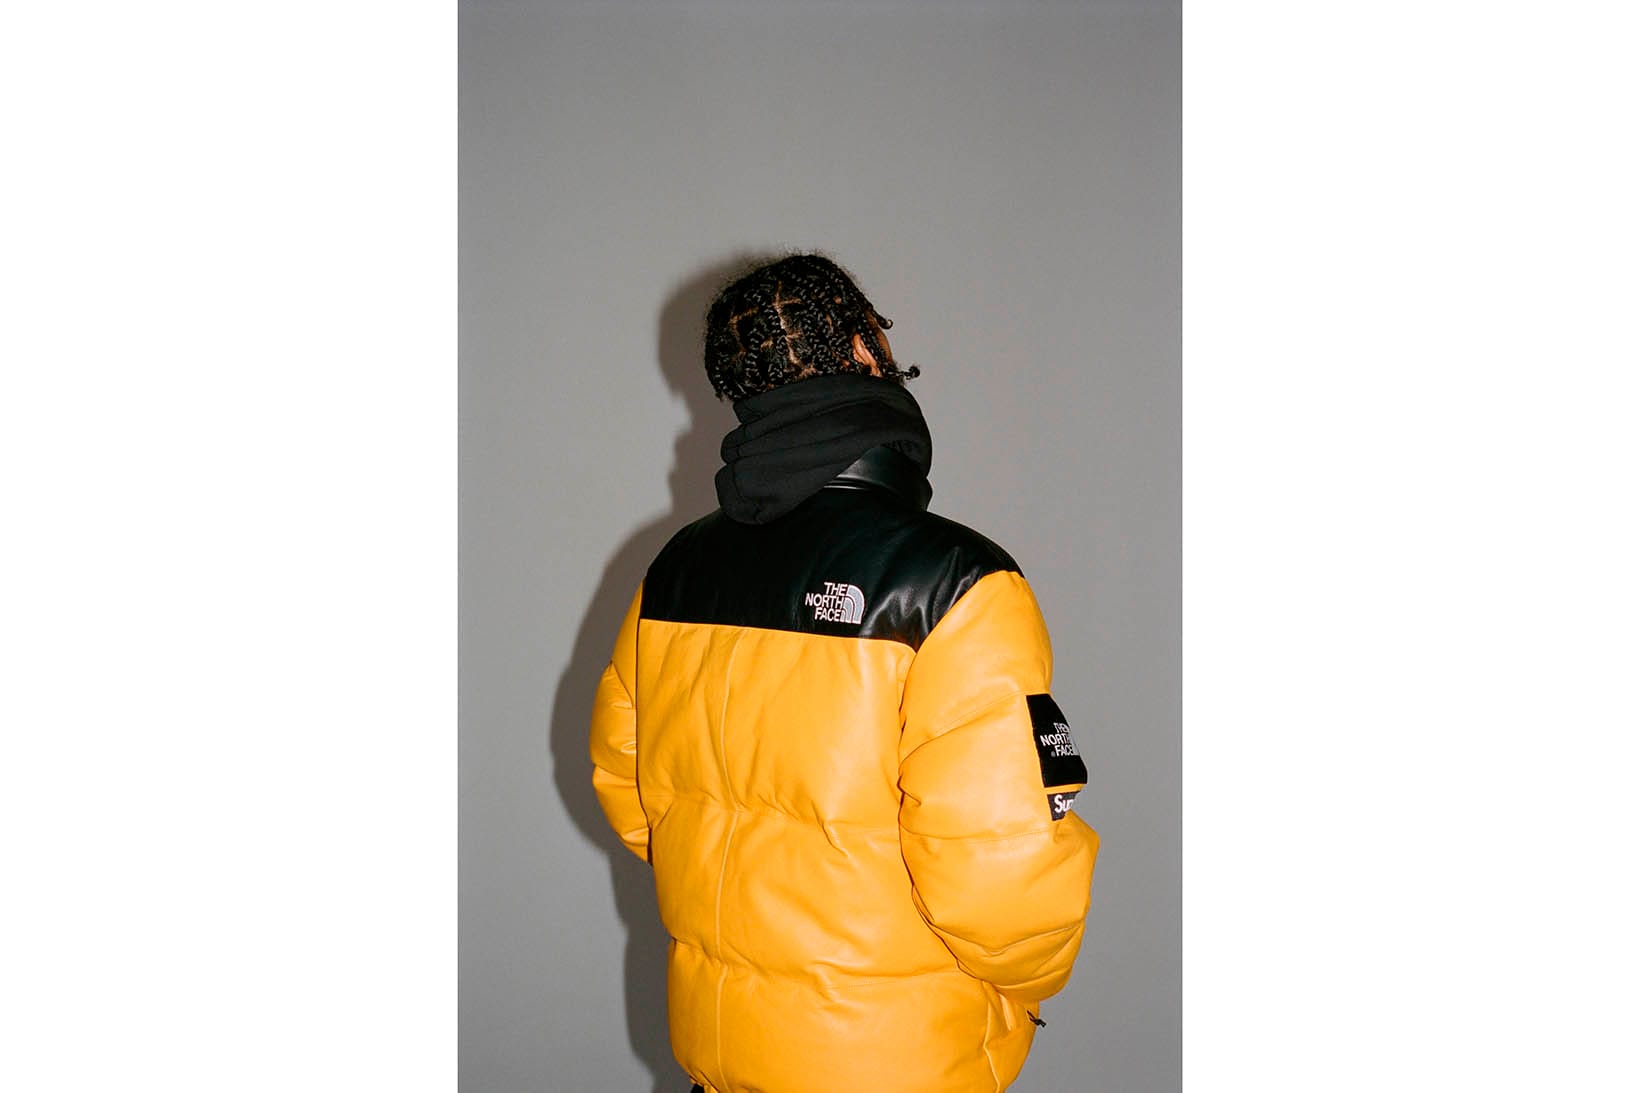 supreme x north face yellow jacket